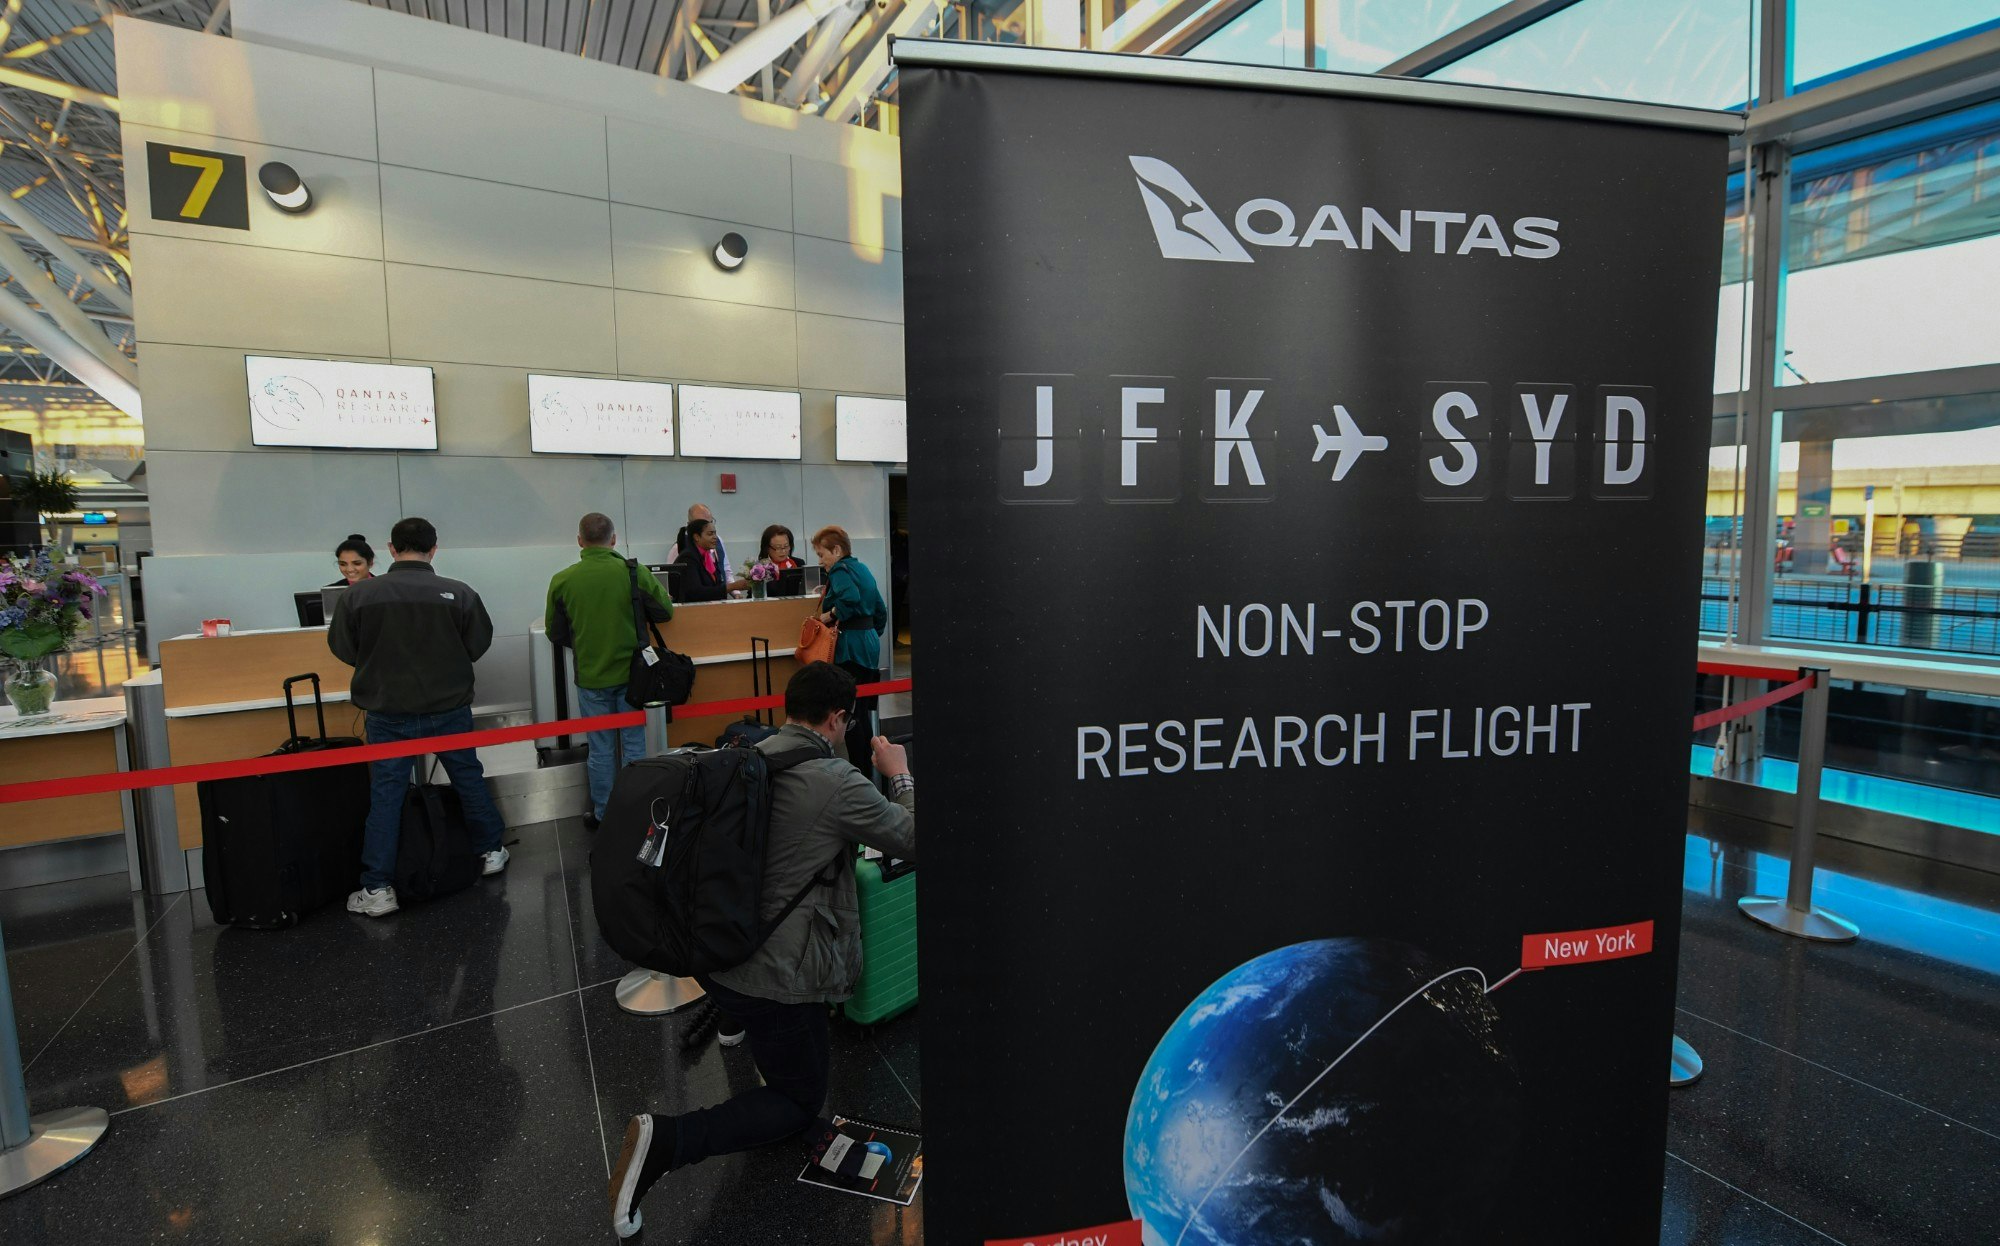 The check-in desk for the Qantas non-stop flight from New York to Sydney